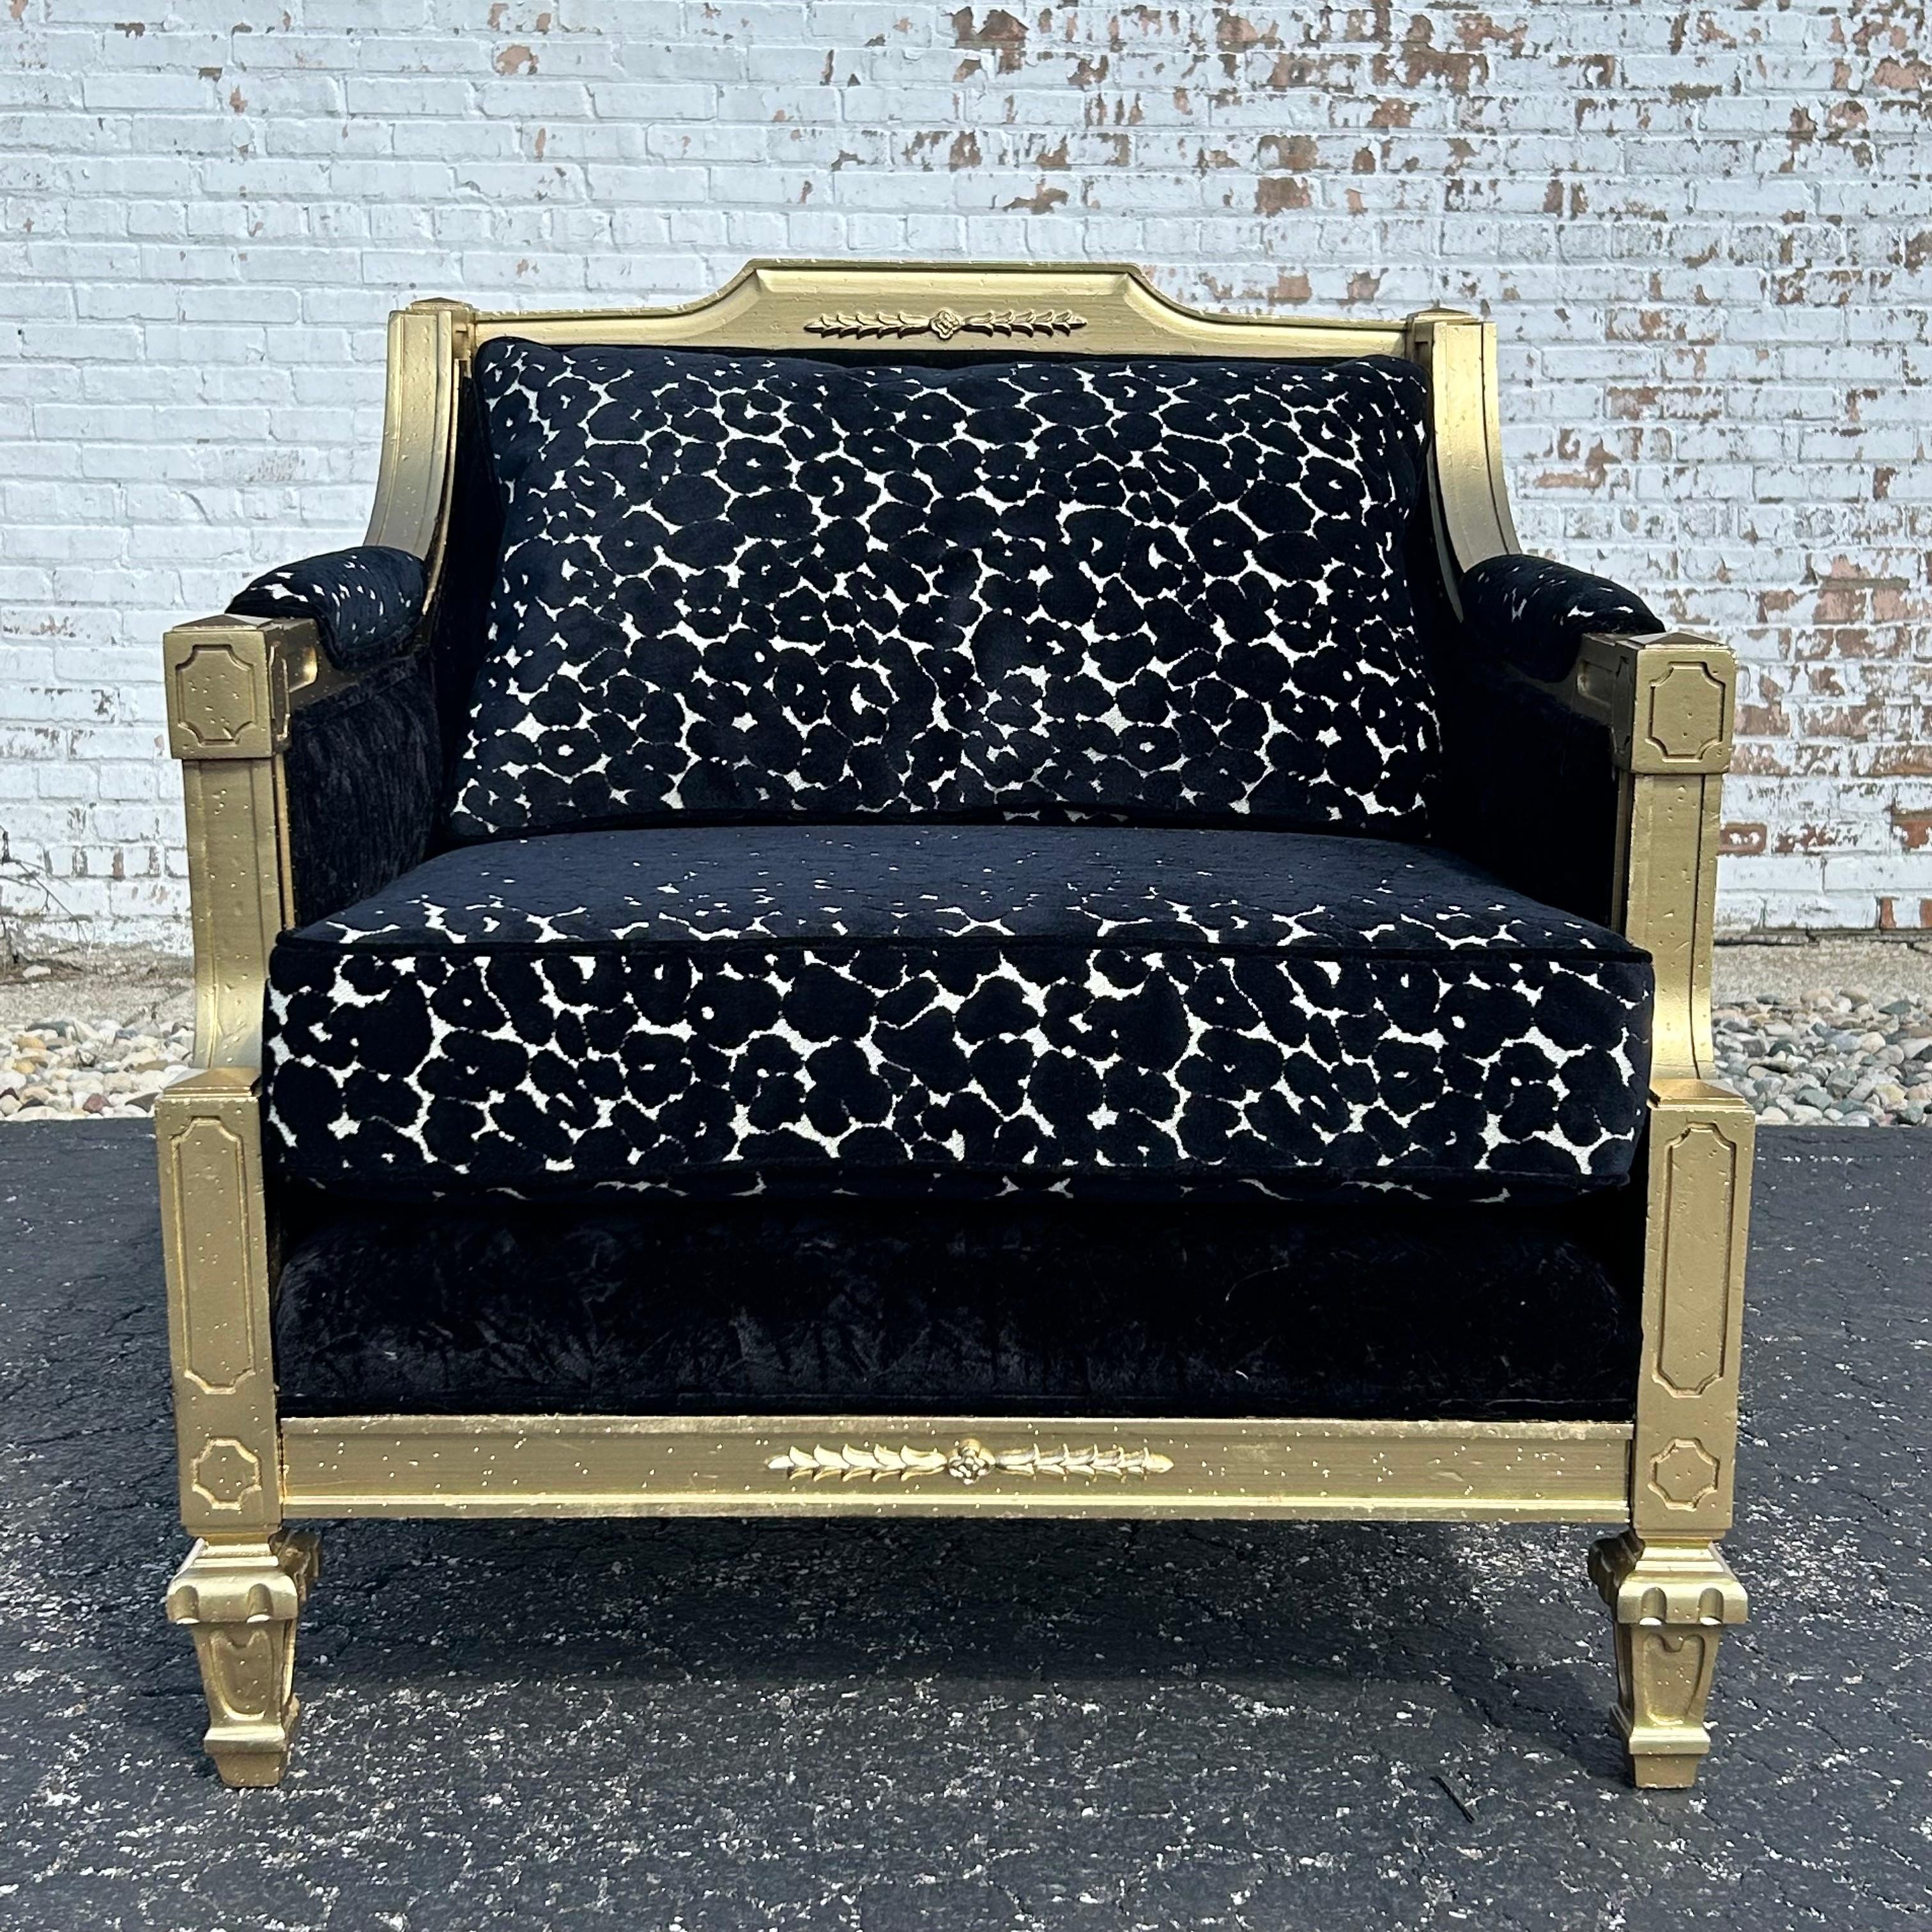 Glamorous and fun -- this Hollywood Regency Style vintage armchair is ready to be the centerpiece of your living space! Black on black -- the crushed velvet texture creates a neutral backdrop for the lush cut-velvet leopard rosettes. Both are